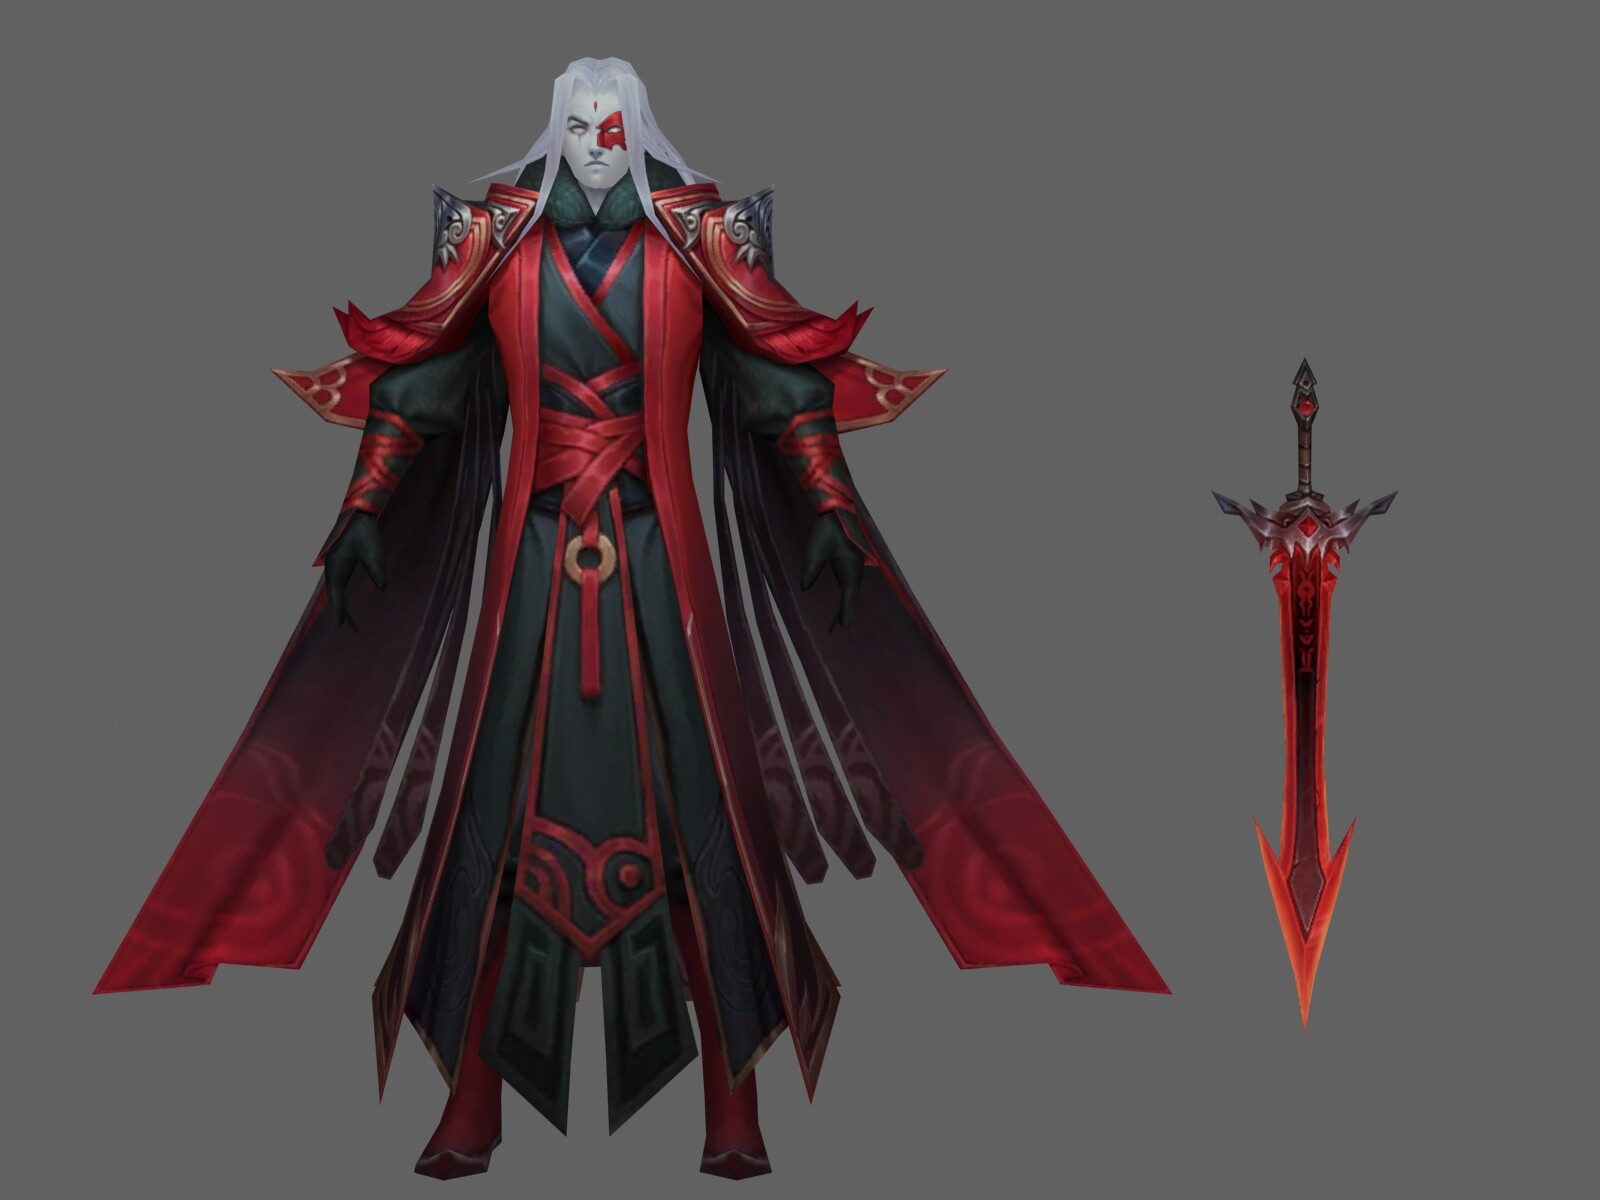 ArtStation - Blood magic guard inferno male role play role | Game Assets